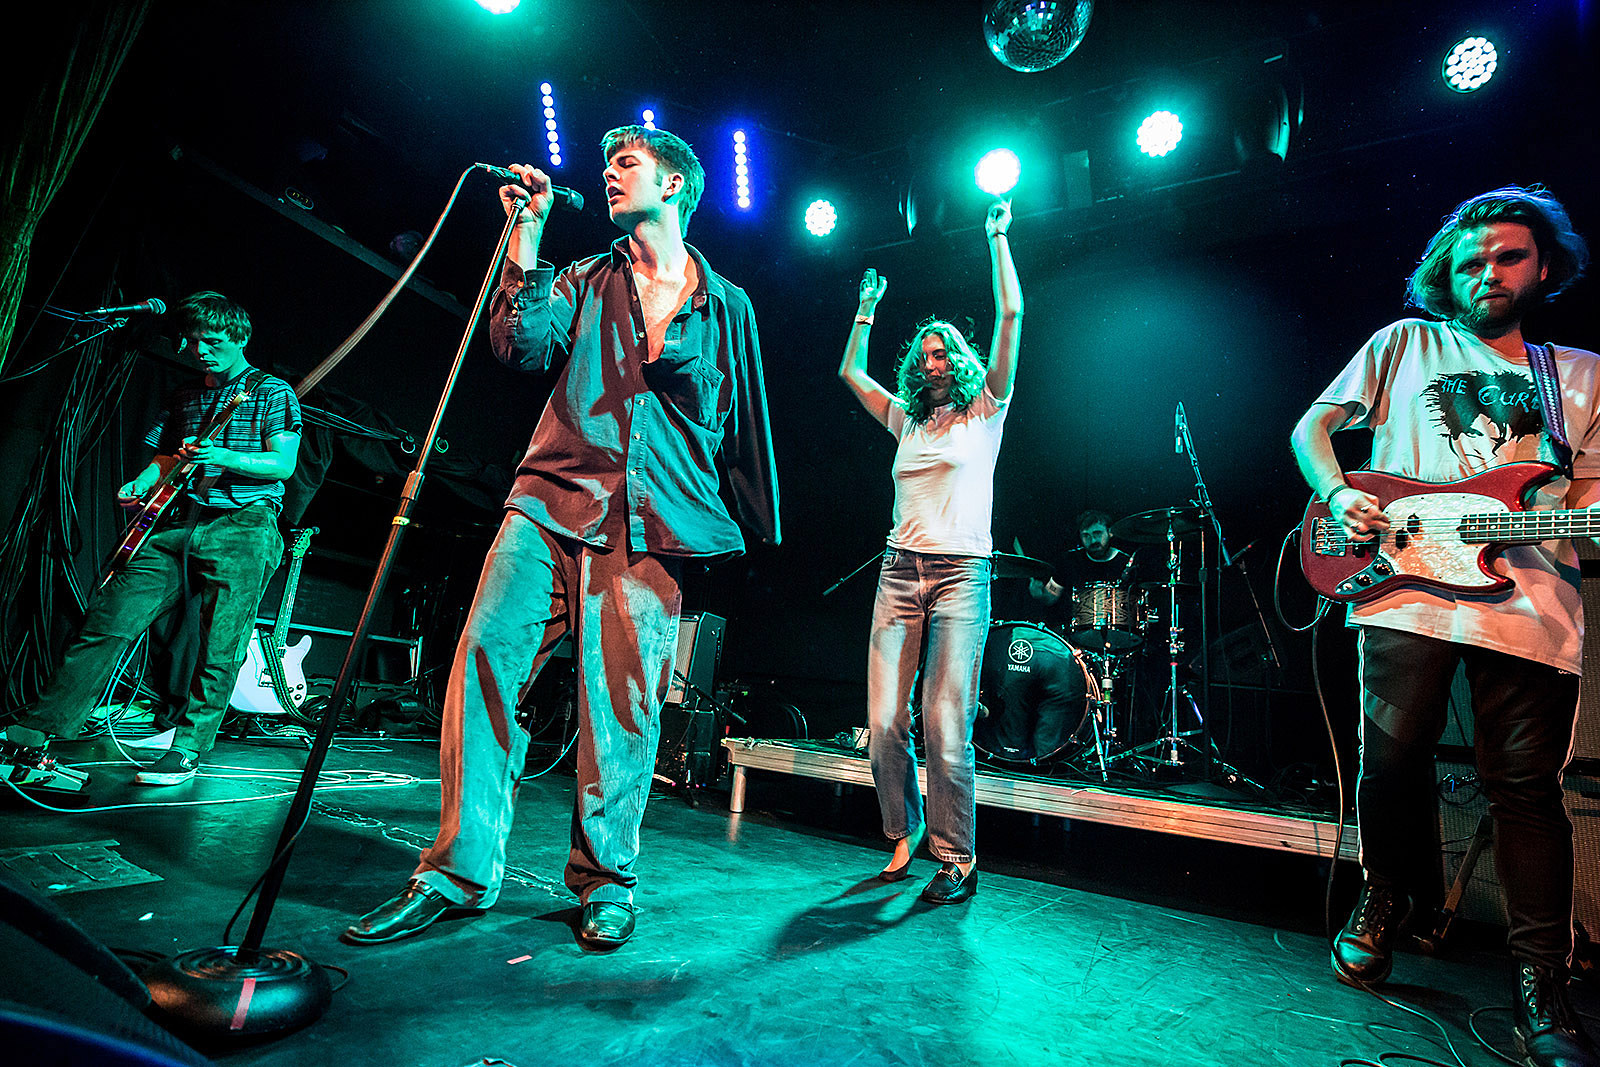 Fontaines . & Pottery played 2 sold-out NYC shows (Bowery Ballroom pics)